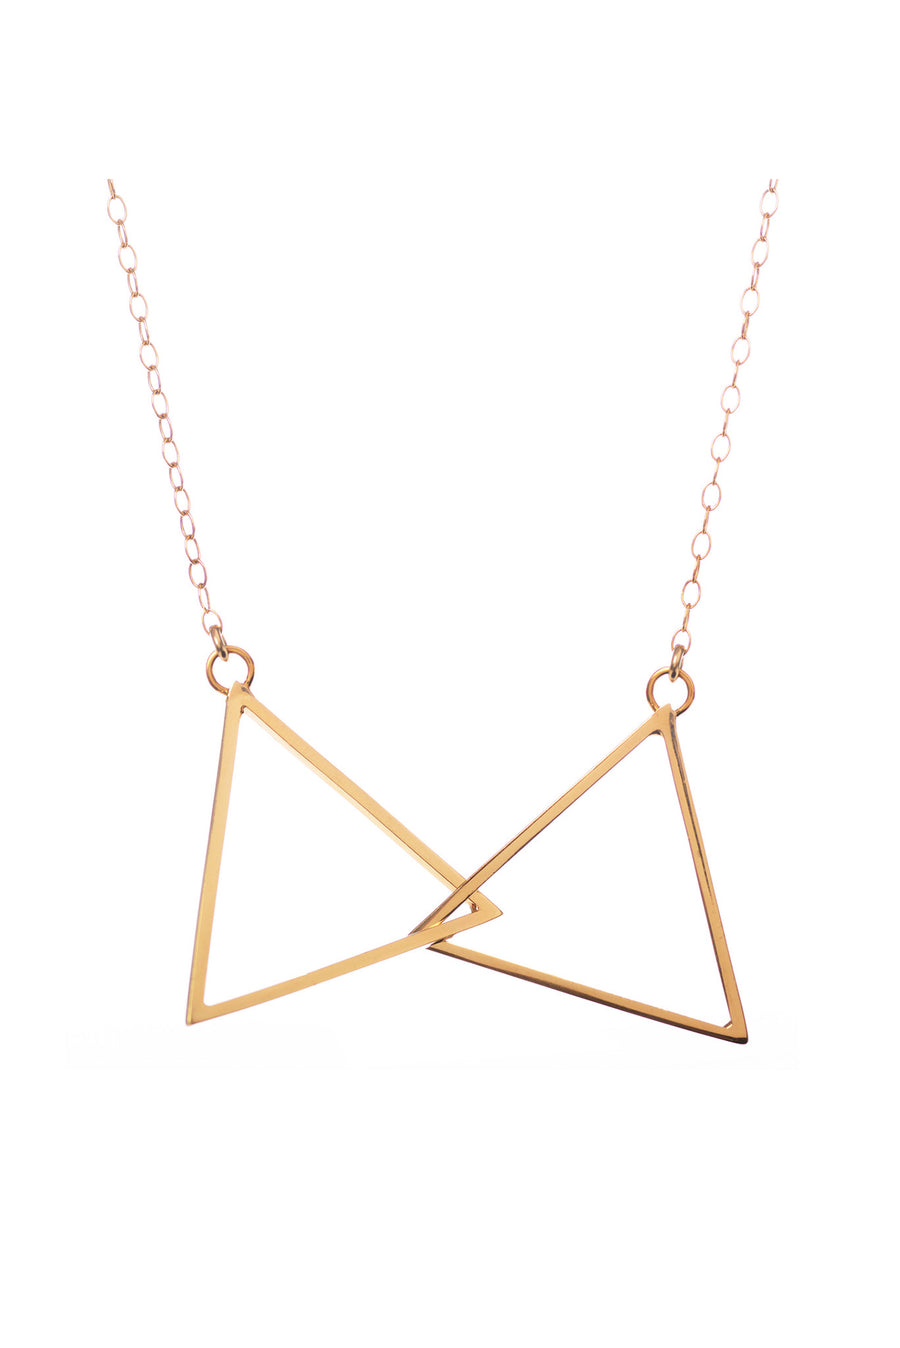 Connected, Gold Necklace